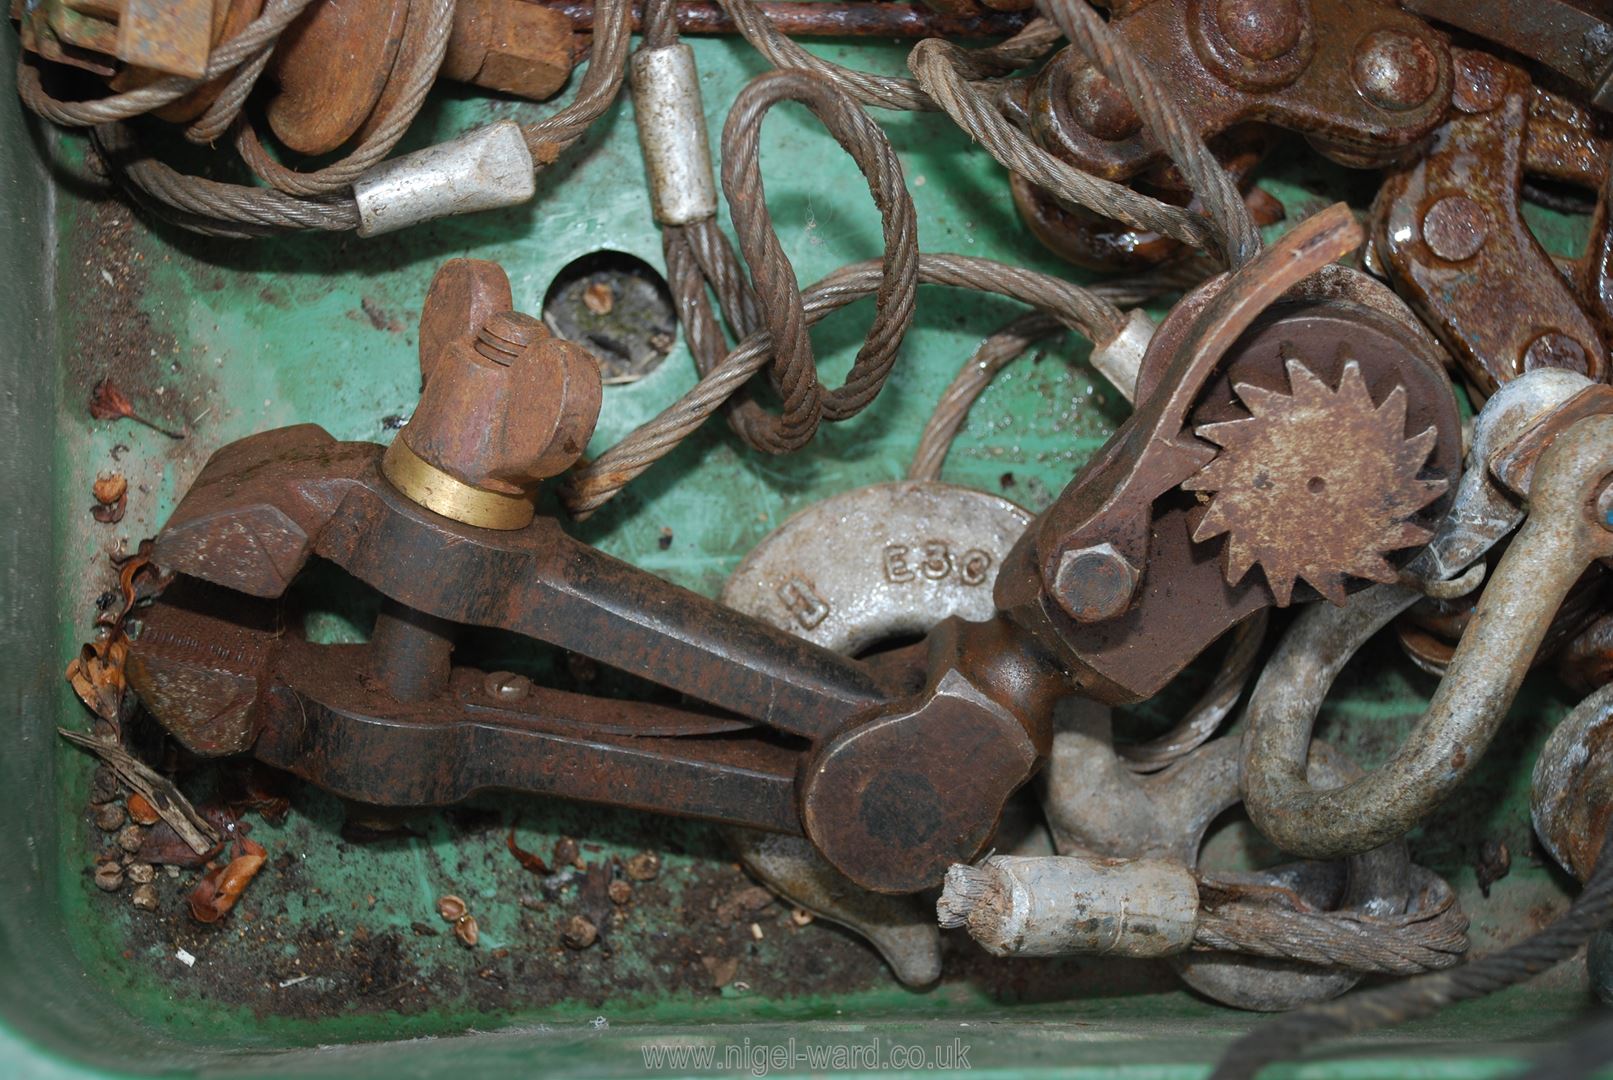 A quantity of fencing wire, wire rope and tensioners, etc. - Image 2 of 3